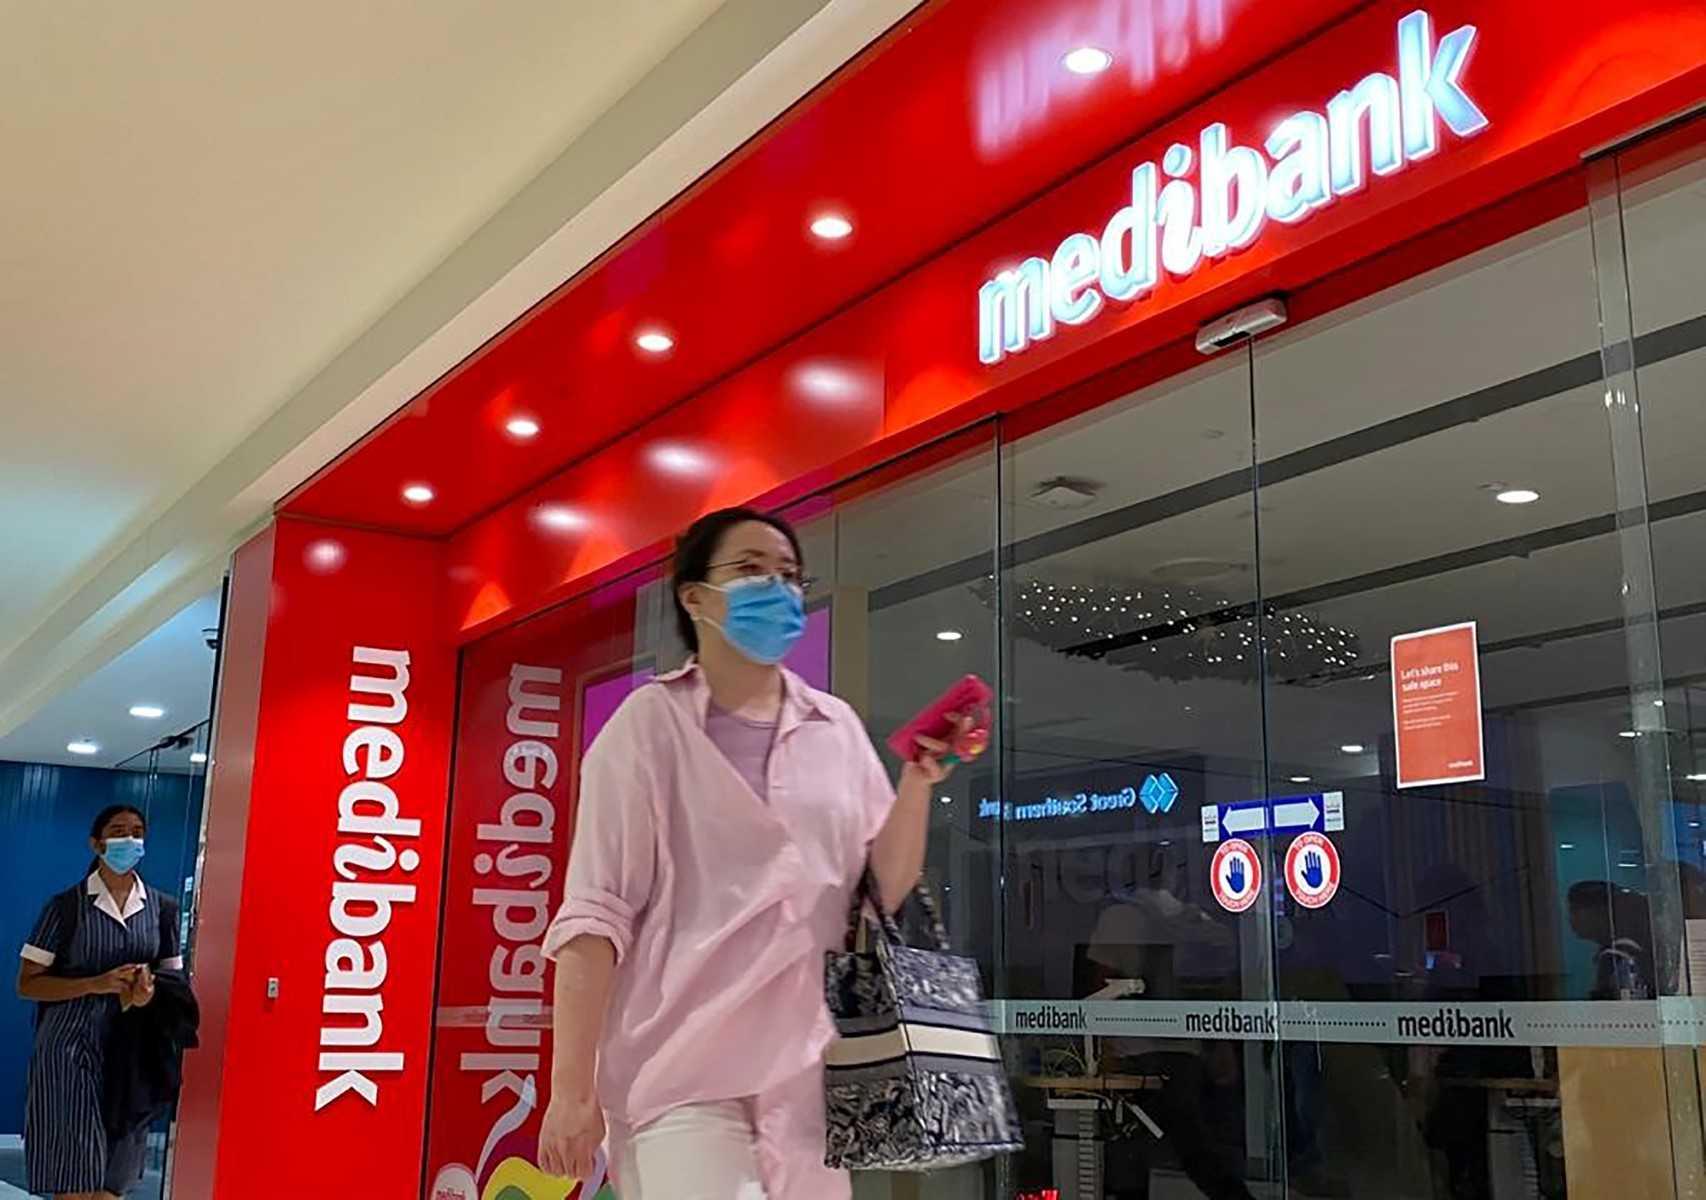 People walk past a shop front for Australia's largest health insurance company Medibank, in Sydney on Nov 11. Photo: AFP